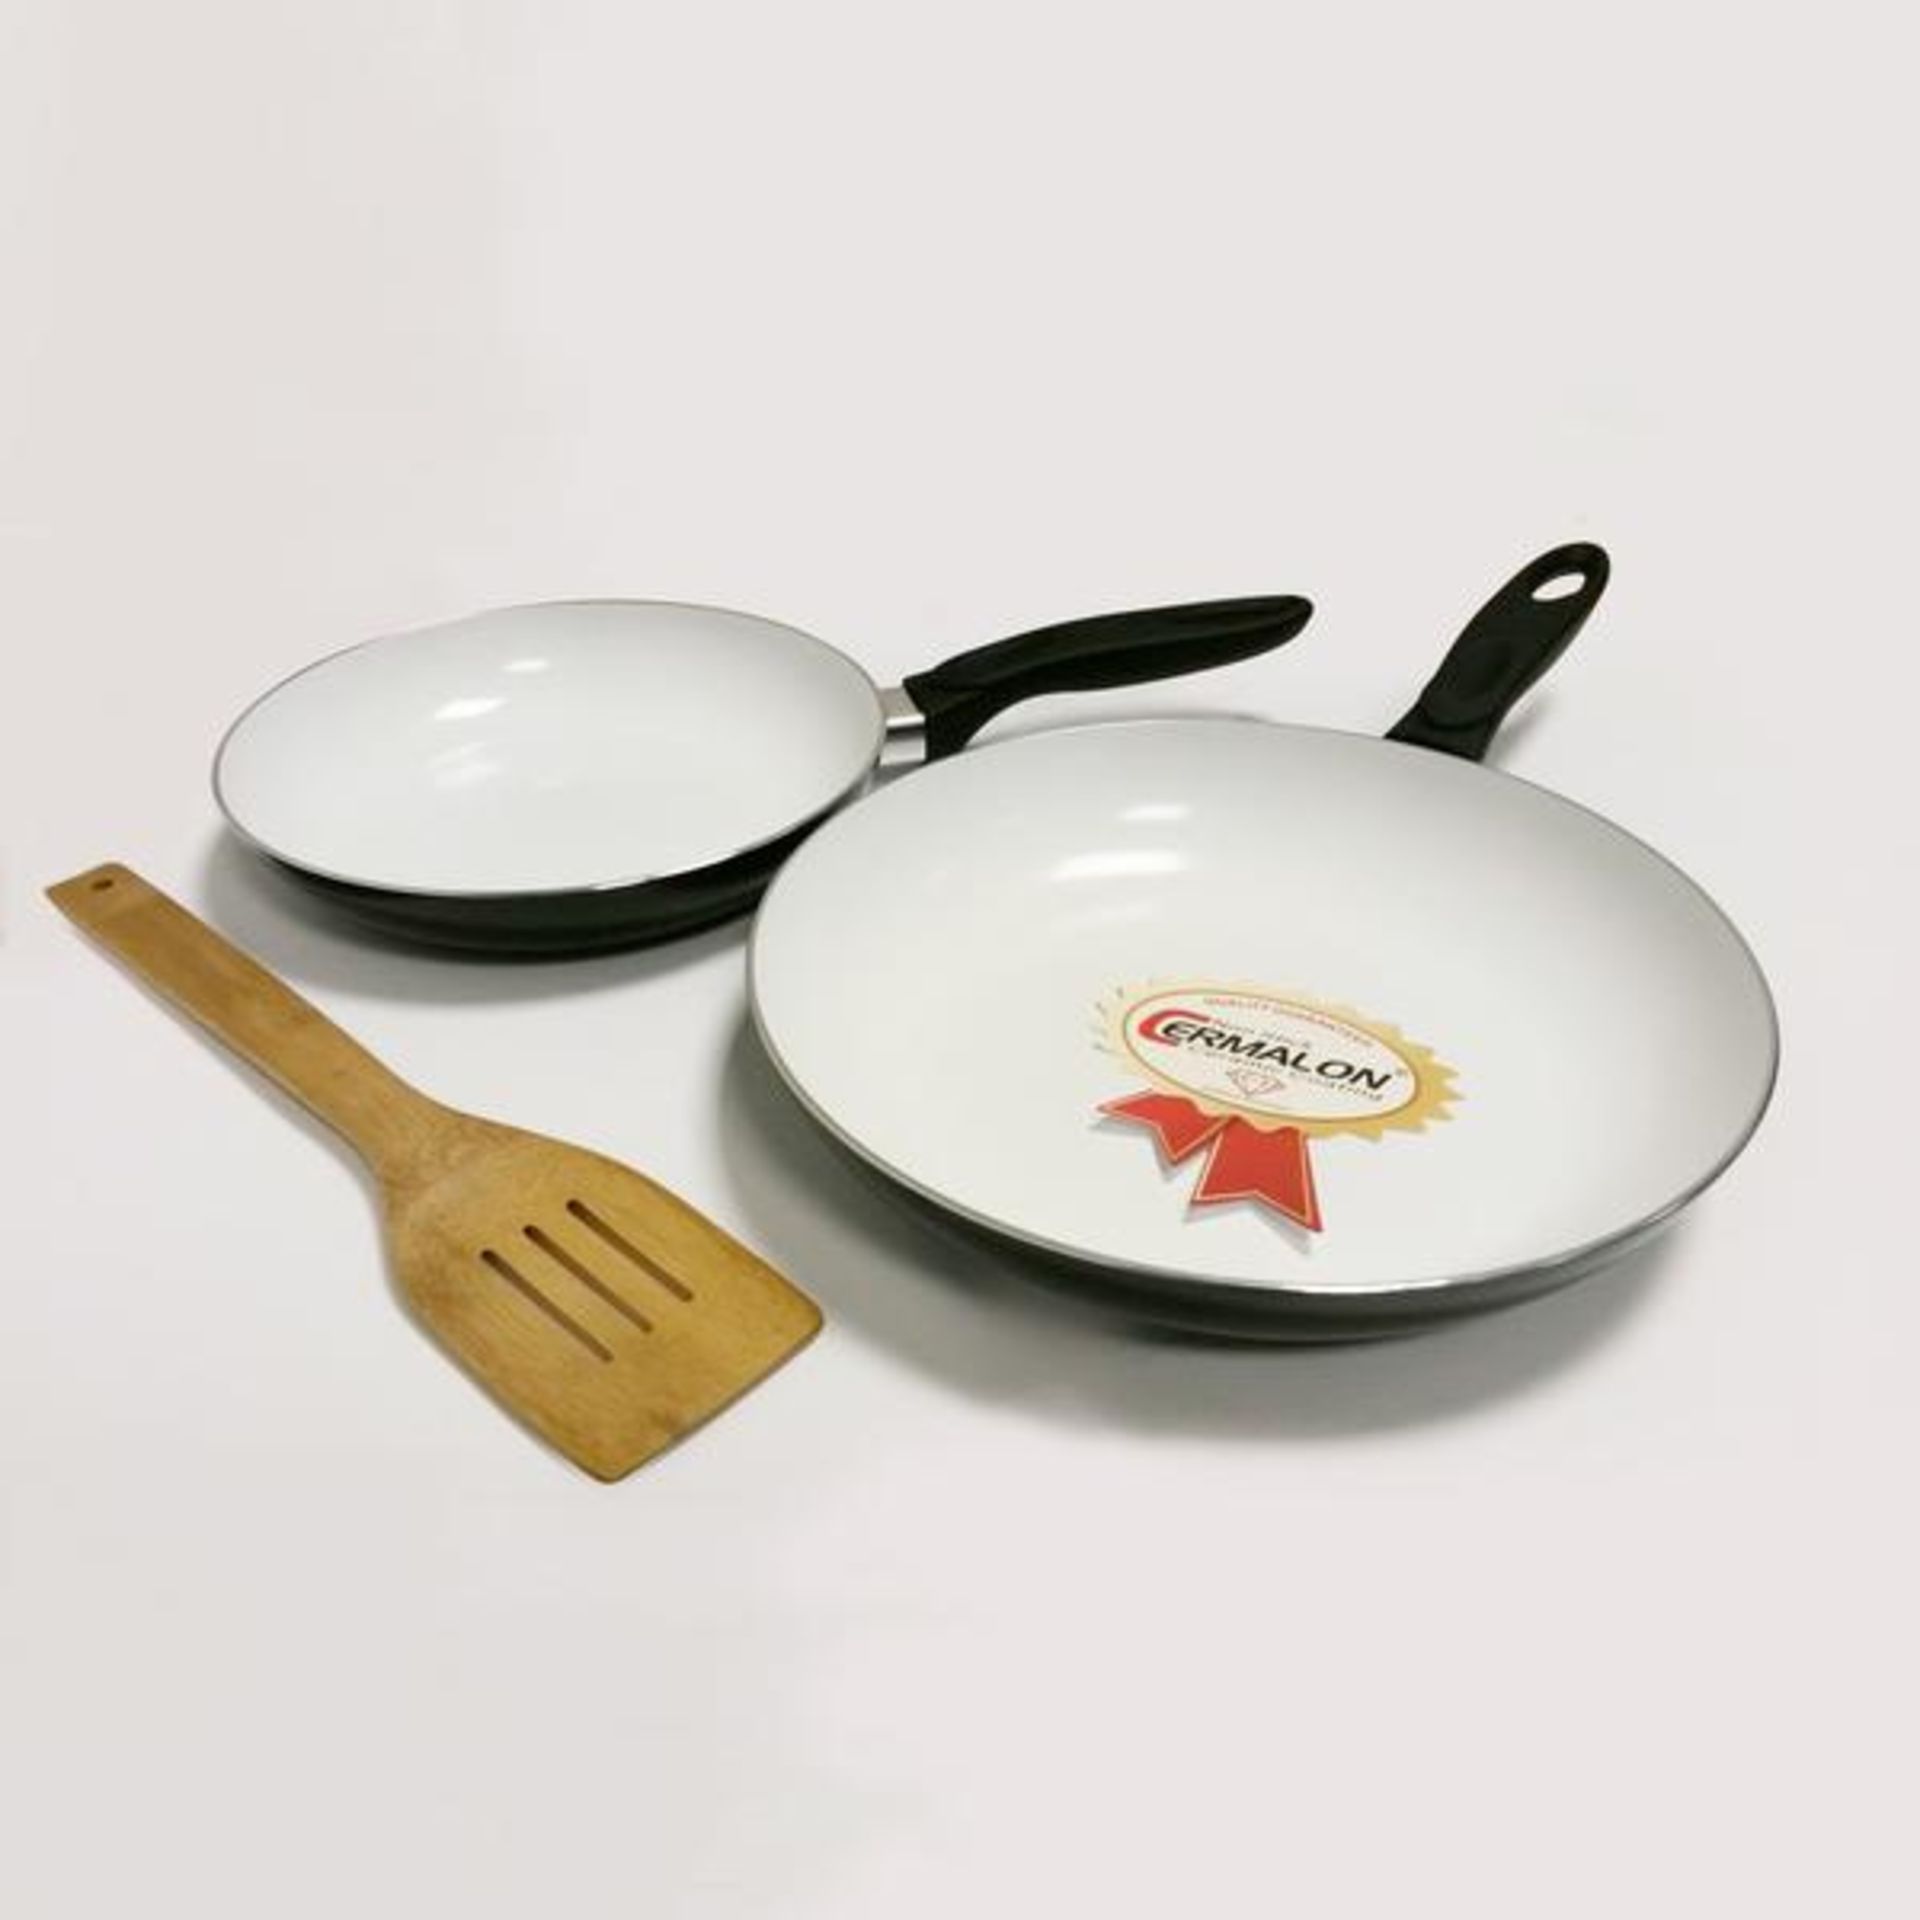 V Brand New Cermalon Non Stick Ceramic Coating 20 & 24cm Frying Pan Set In Red With Spatula